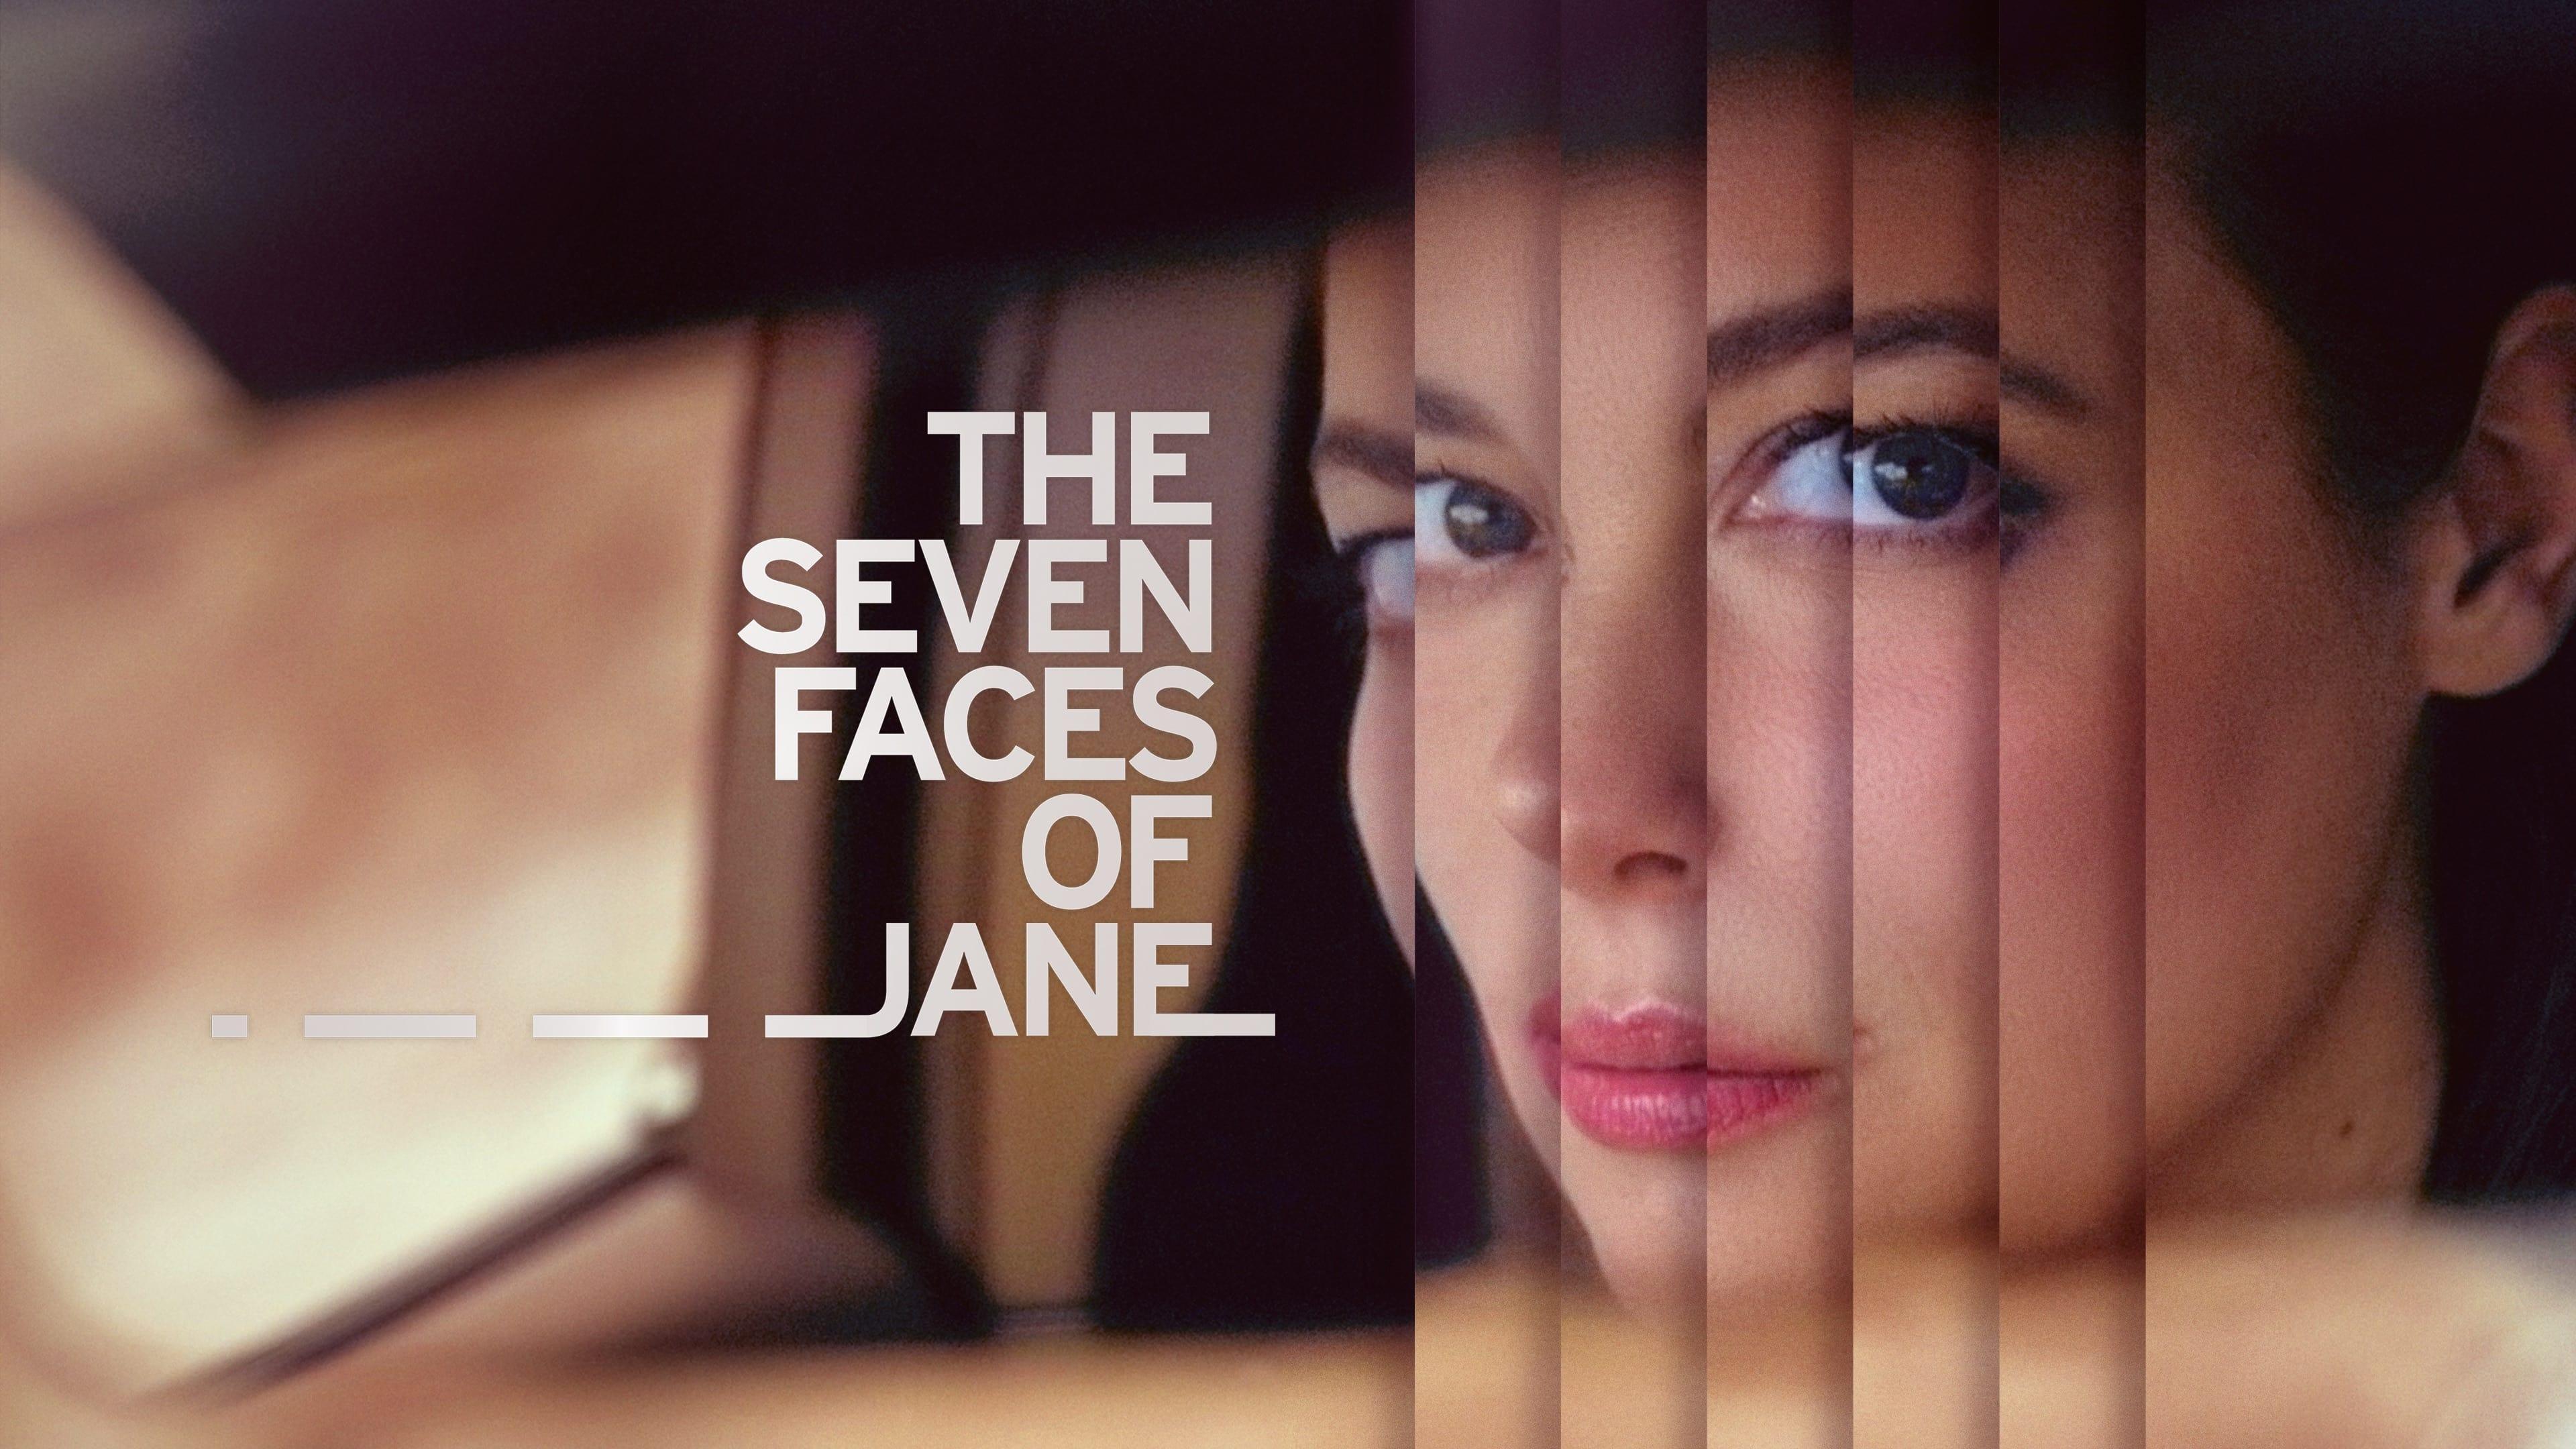 The Seven Faces of Jane backdrop